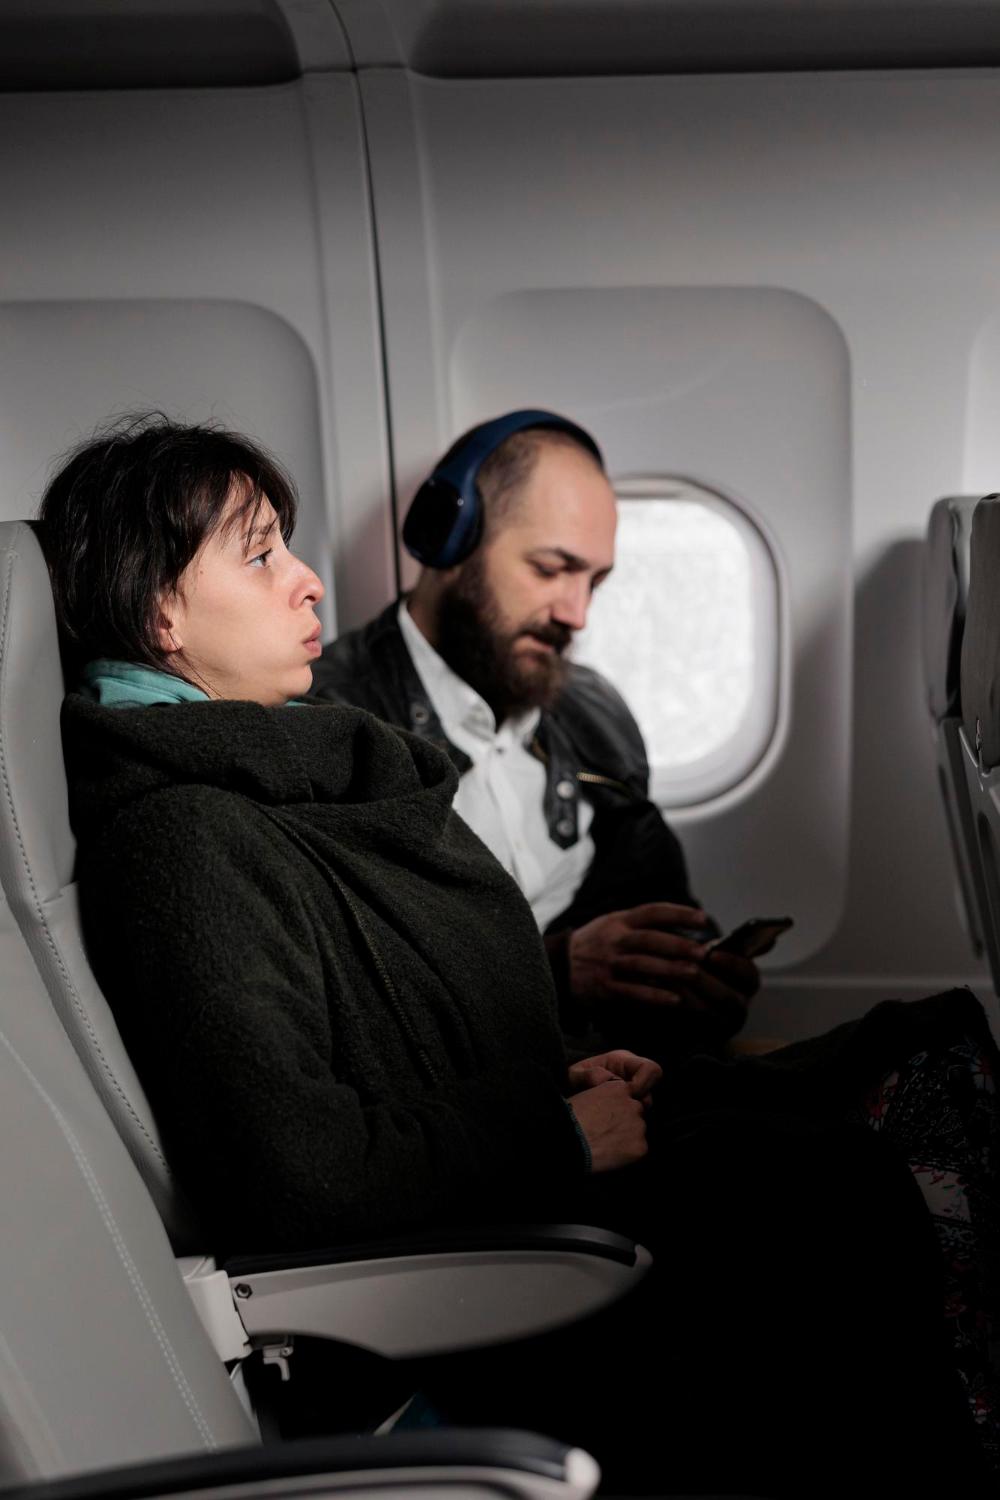 Why are Airplane Cabins so cold?